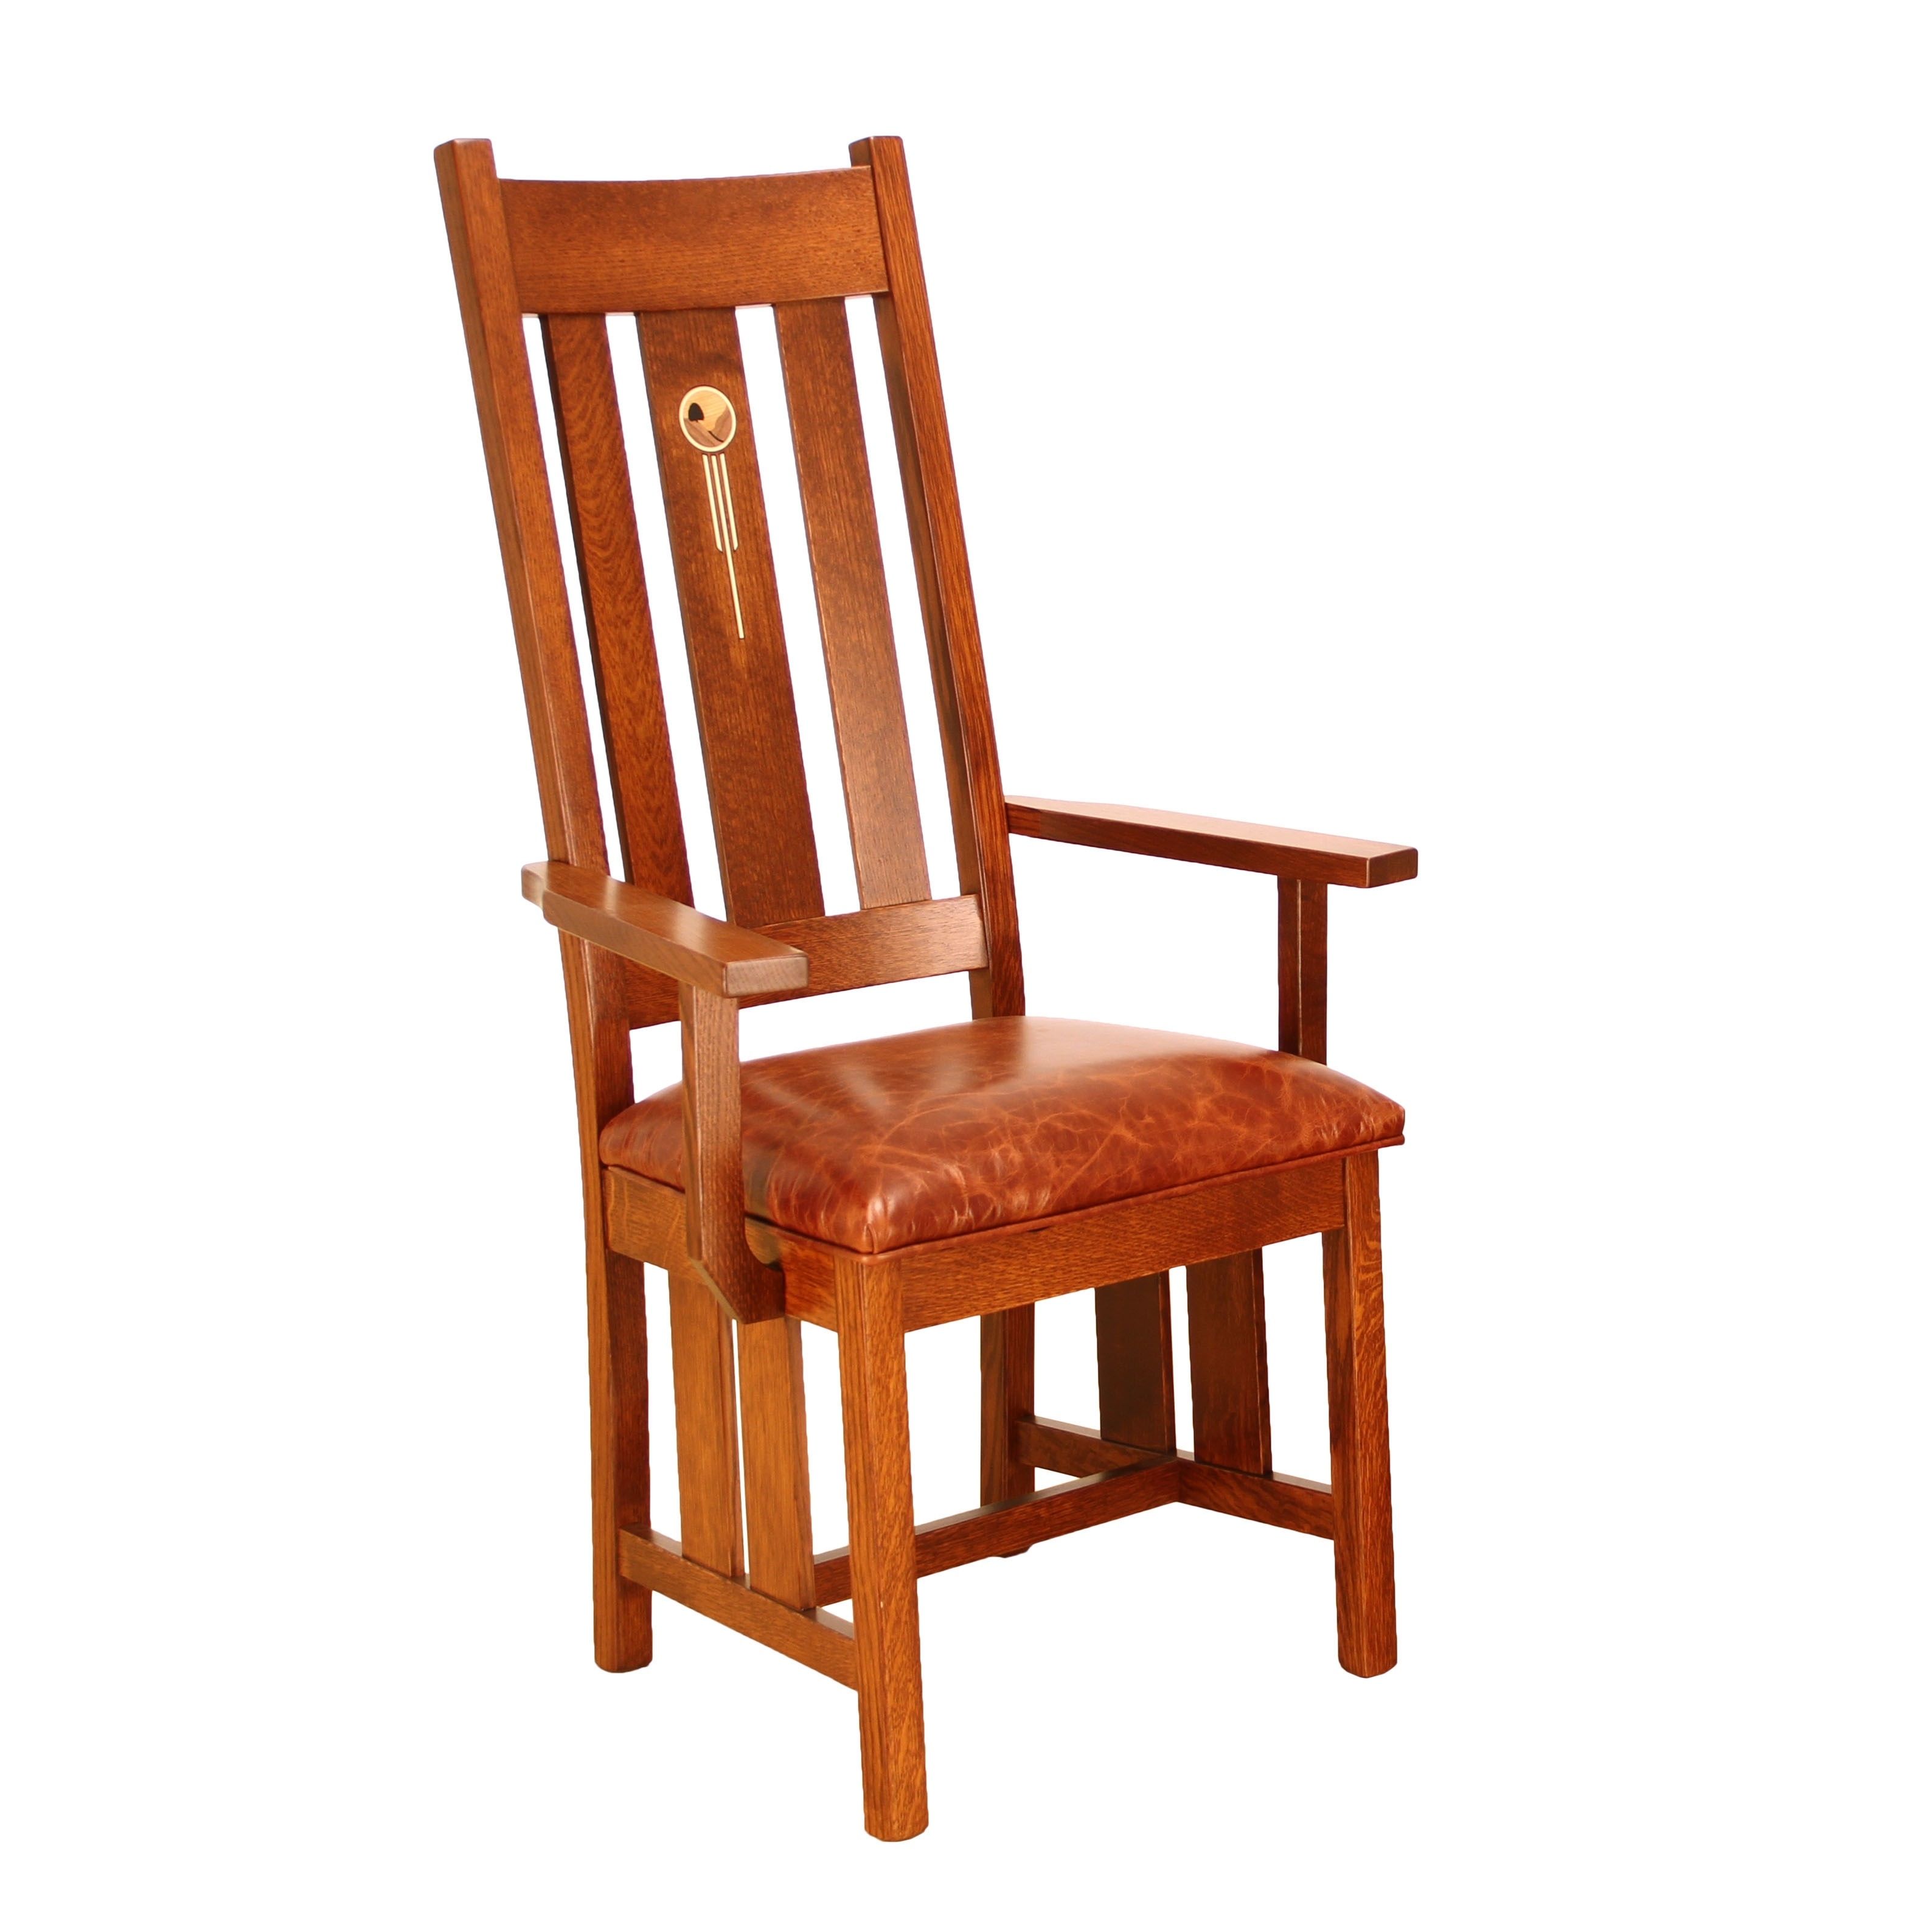 Latest Craftsman Arm Chairs With Regard To Craftsman Arm Chair (View 5 of 20)